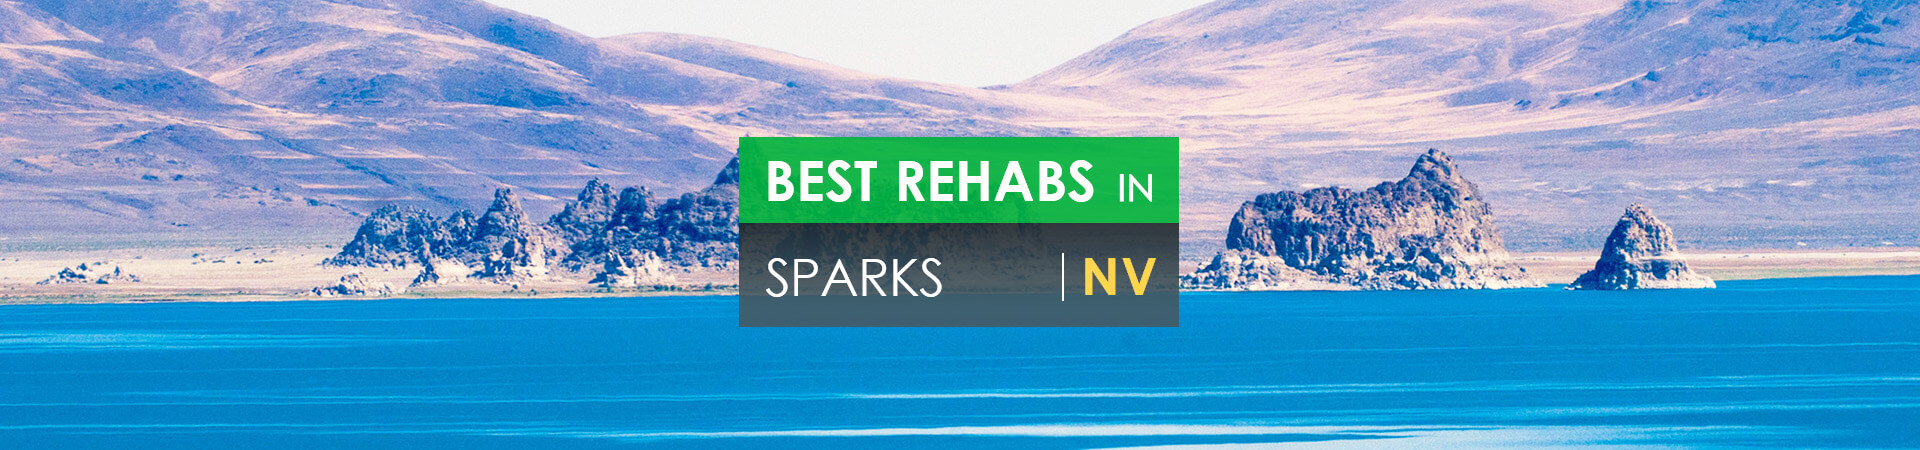 Best rehabs in Sparks, NV